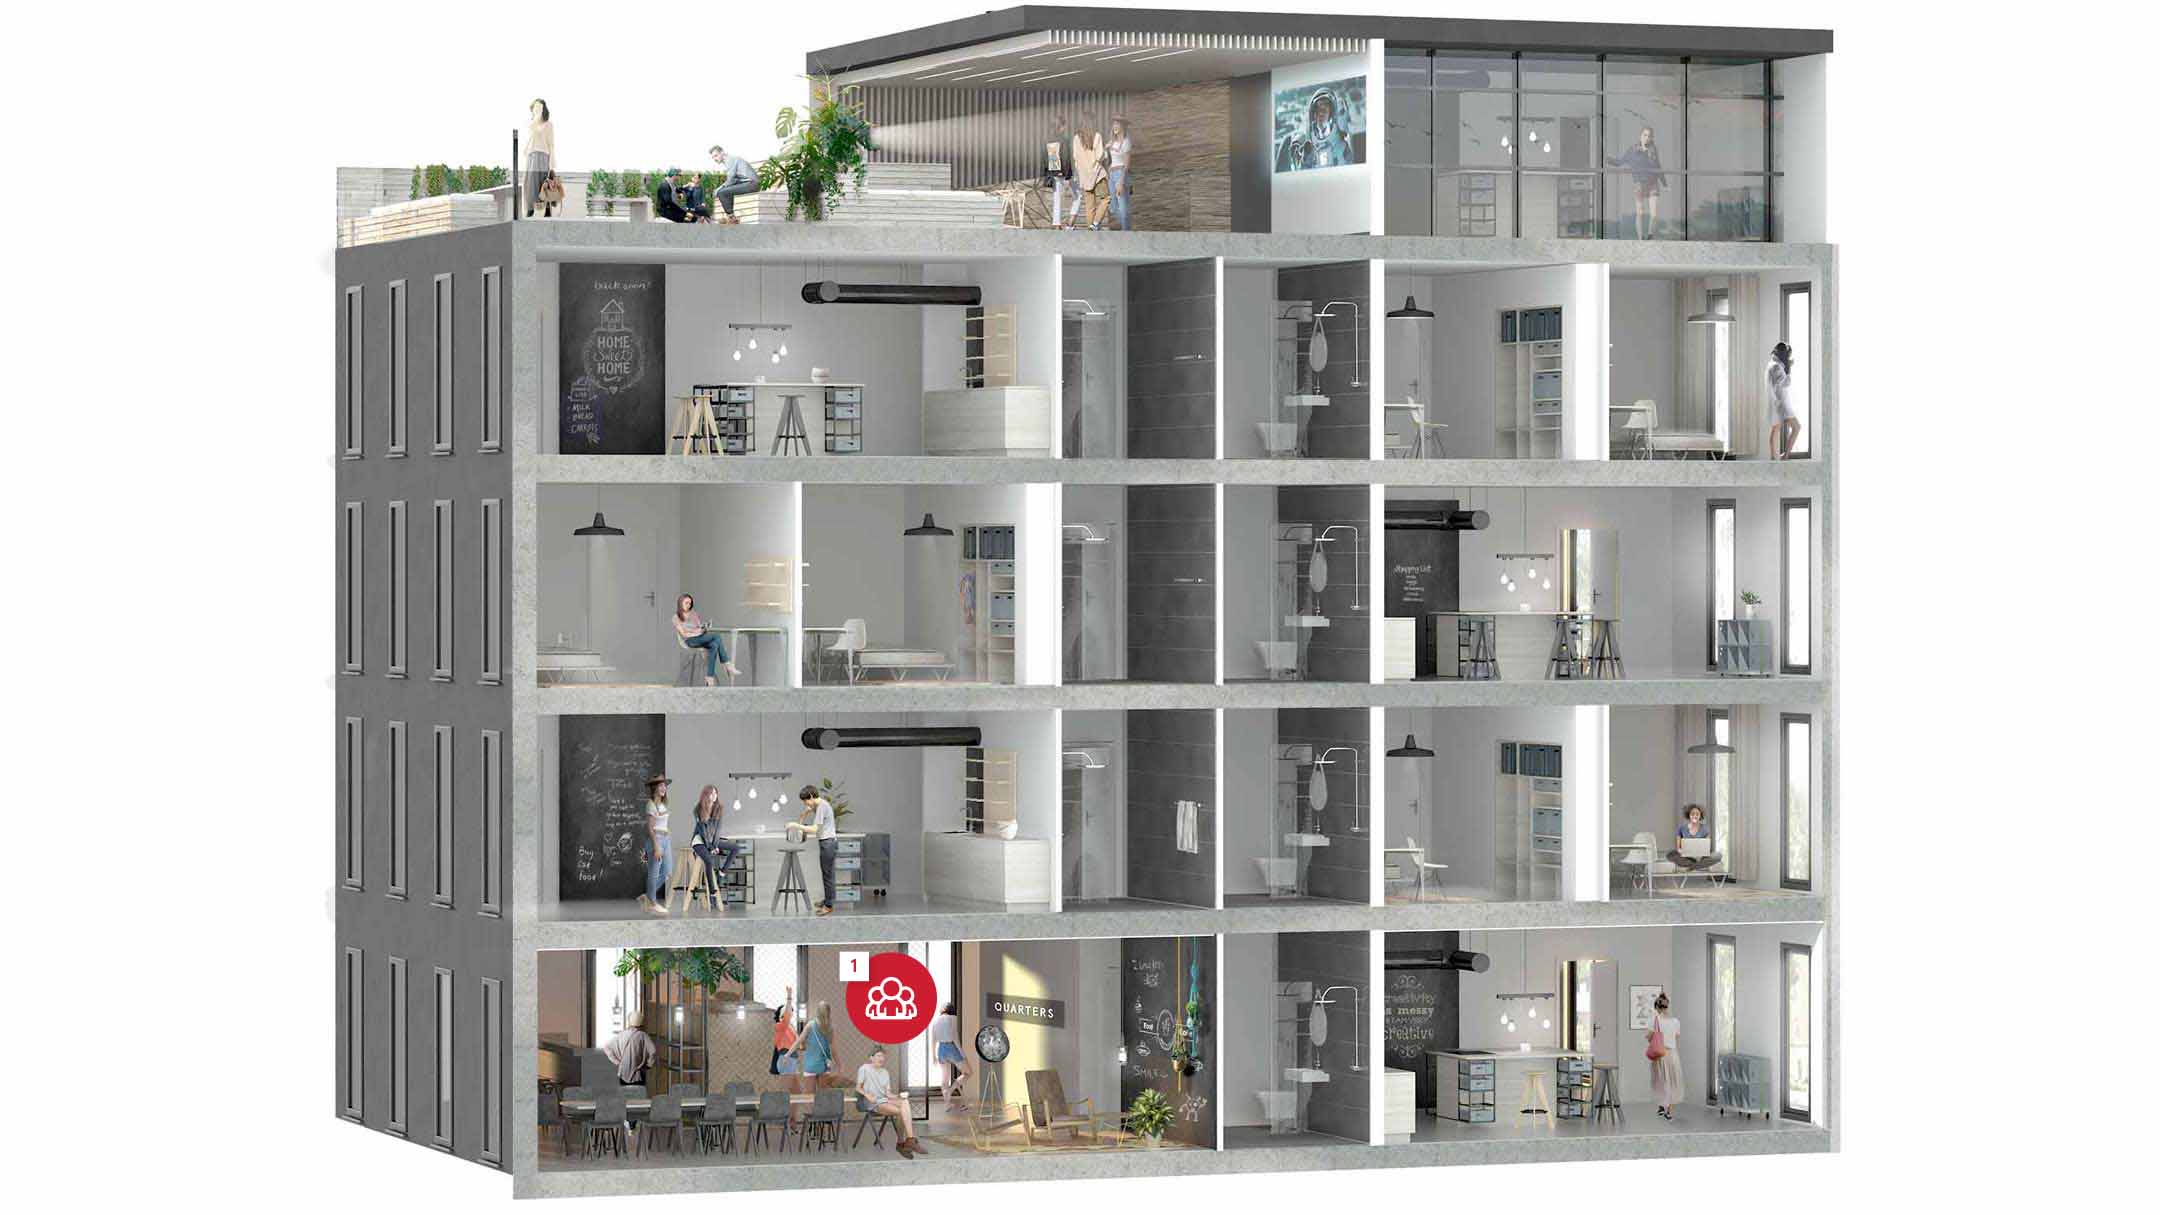 Sectional rendering of Quarters co-living development